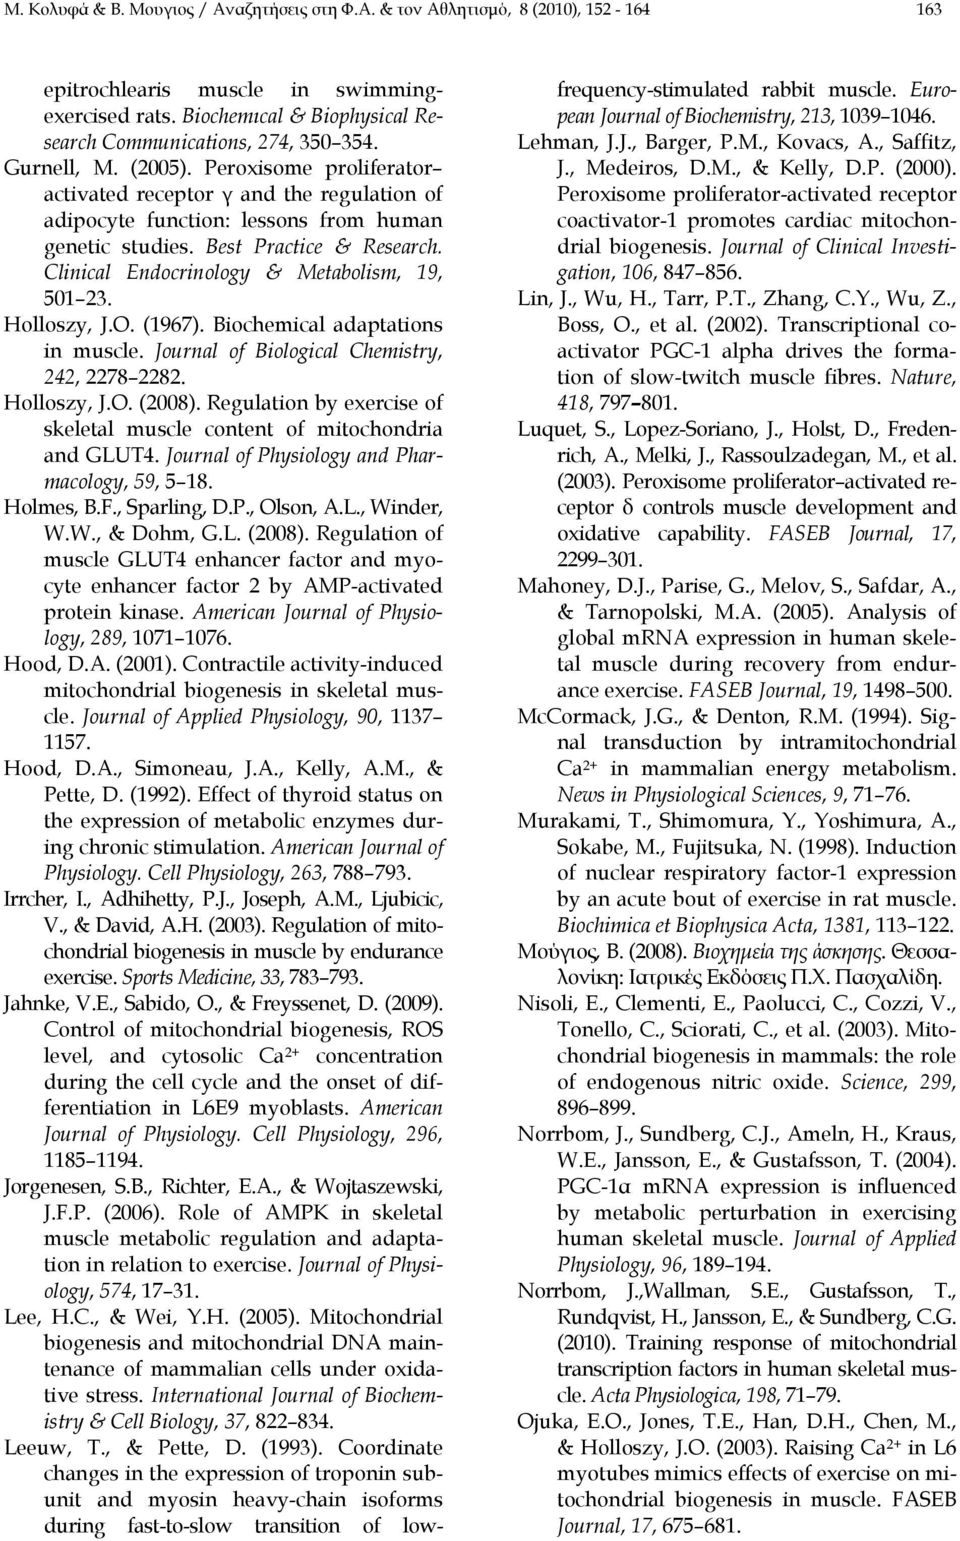 Clinical Endocrinology & Metabolism, 19, 501 23. Holloszy, J.O. (1967). Biochemical adaptations in muscle. Journal of Biological Chemistry, 242, 2278 2282. Holloszy, J.O. (2008).